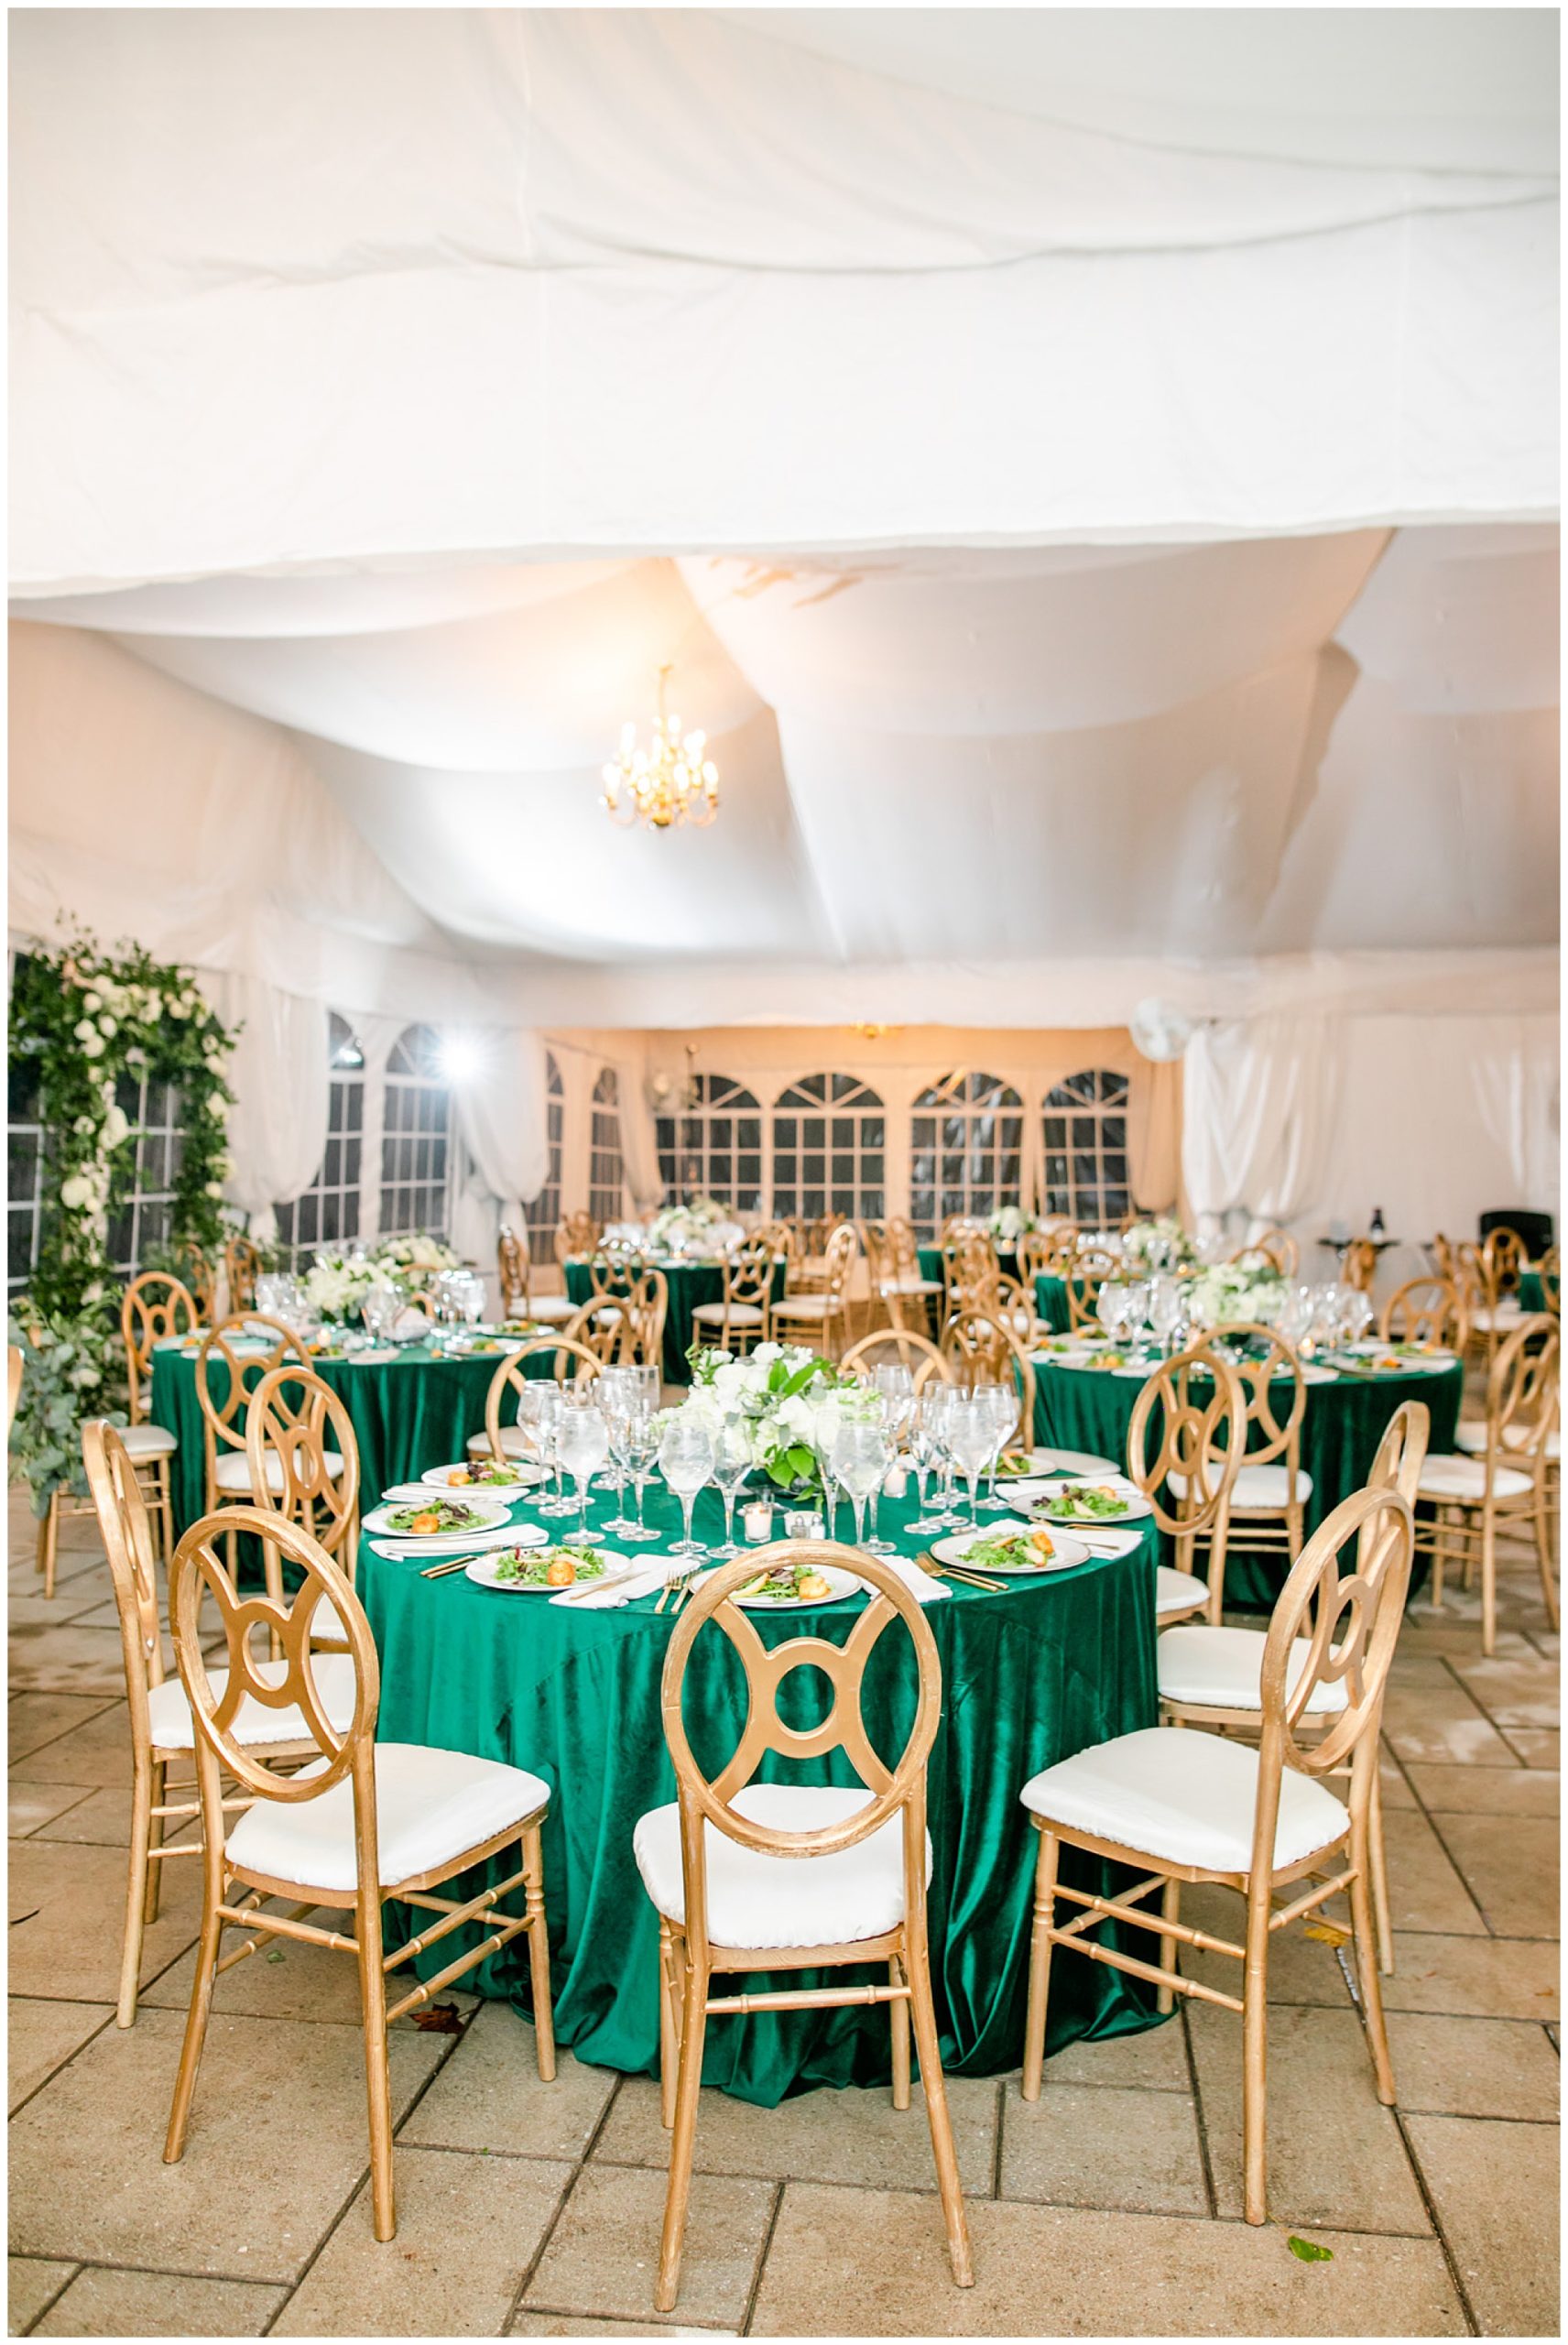 emerald and ivory Woodend Sanctuary wedding, autumn Woodend Sanctuary wedding, rainy day wedding, Maryland wedding venues, Chevy Chase MD wedding venue, mansion wedding, manor house wedding, indoor wedding, DC wedding venue, DC wedding photographer, Baltimore wedding photographer, Rachel E.H. Photography, emerald and ivory aesthetic, gold and emerald reception, gold chairs, emerald tablecloths